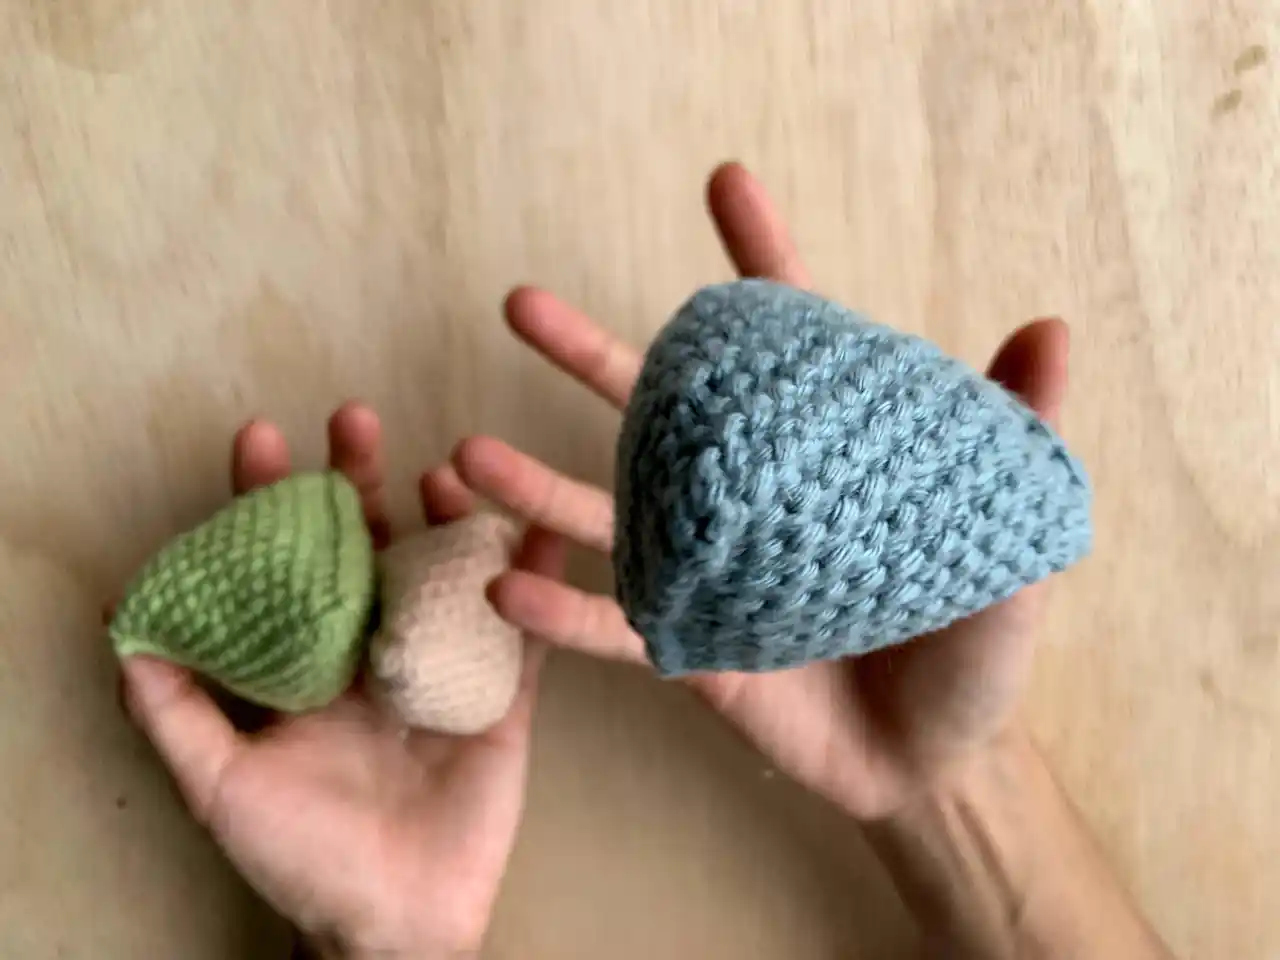 can these bean bag beans be used to add weight to amigurumi? are they the  same as poly pellets? these are the closest bean-looking things i can find  here : r/Amigurumi